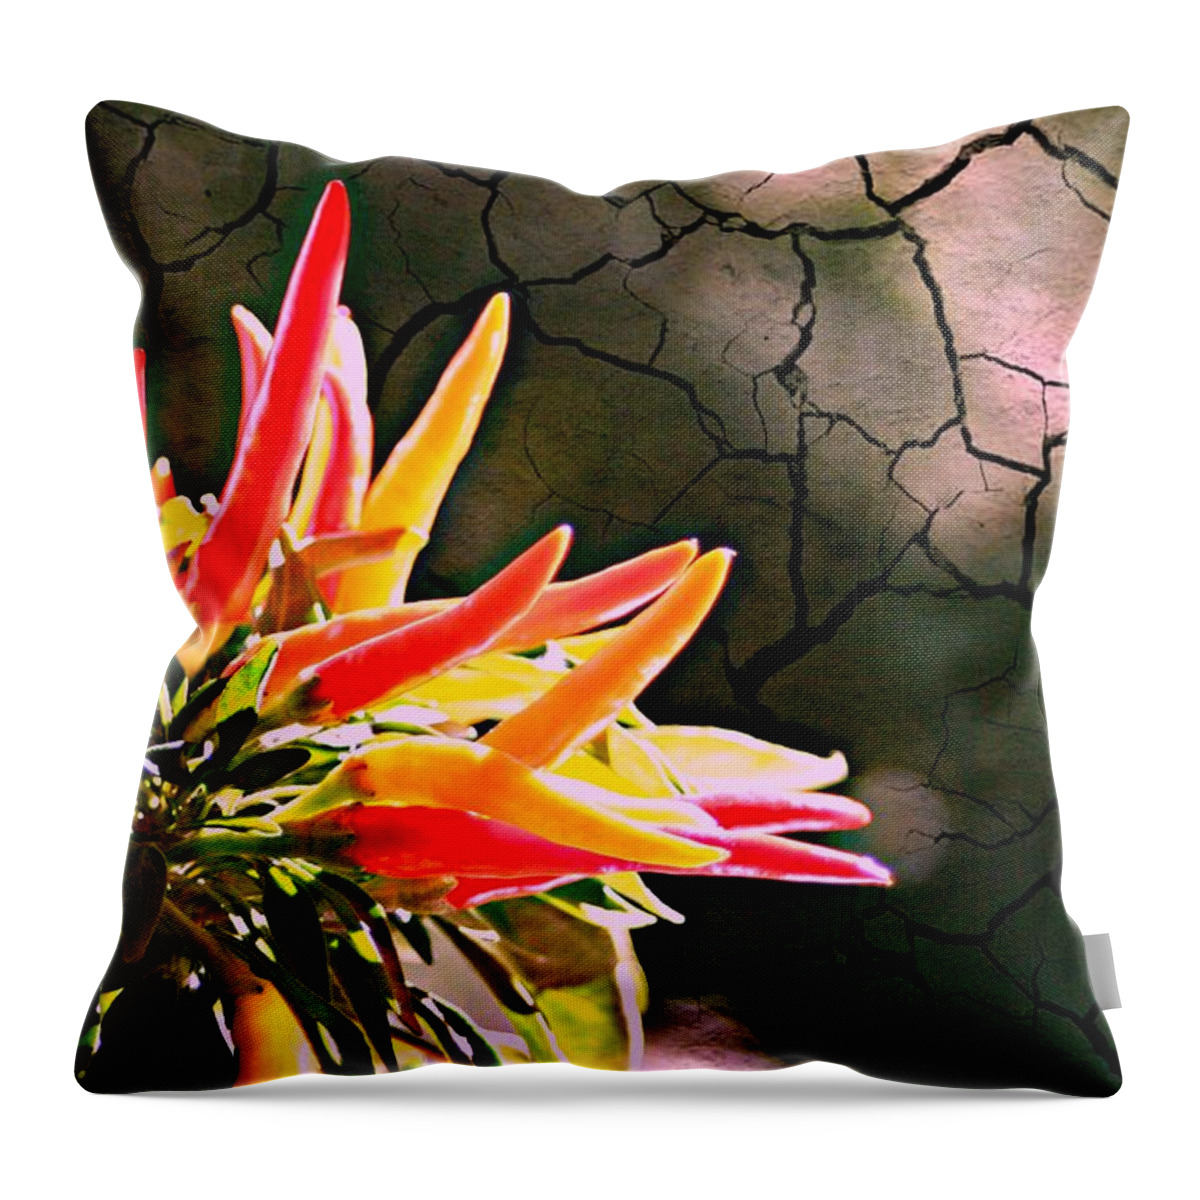 Abstract Throw Pillow featuring the photograph Patio Pepper Plant by Barbara S Nickerson